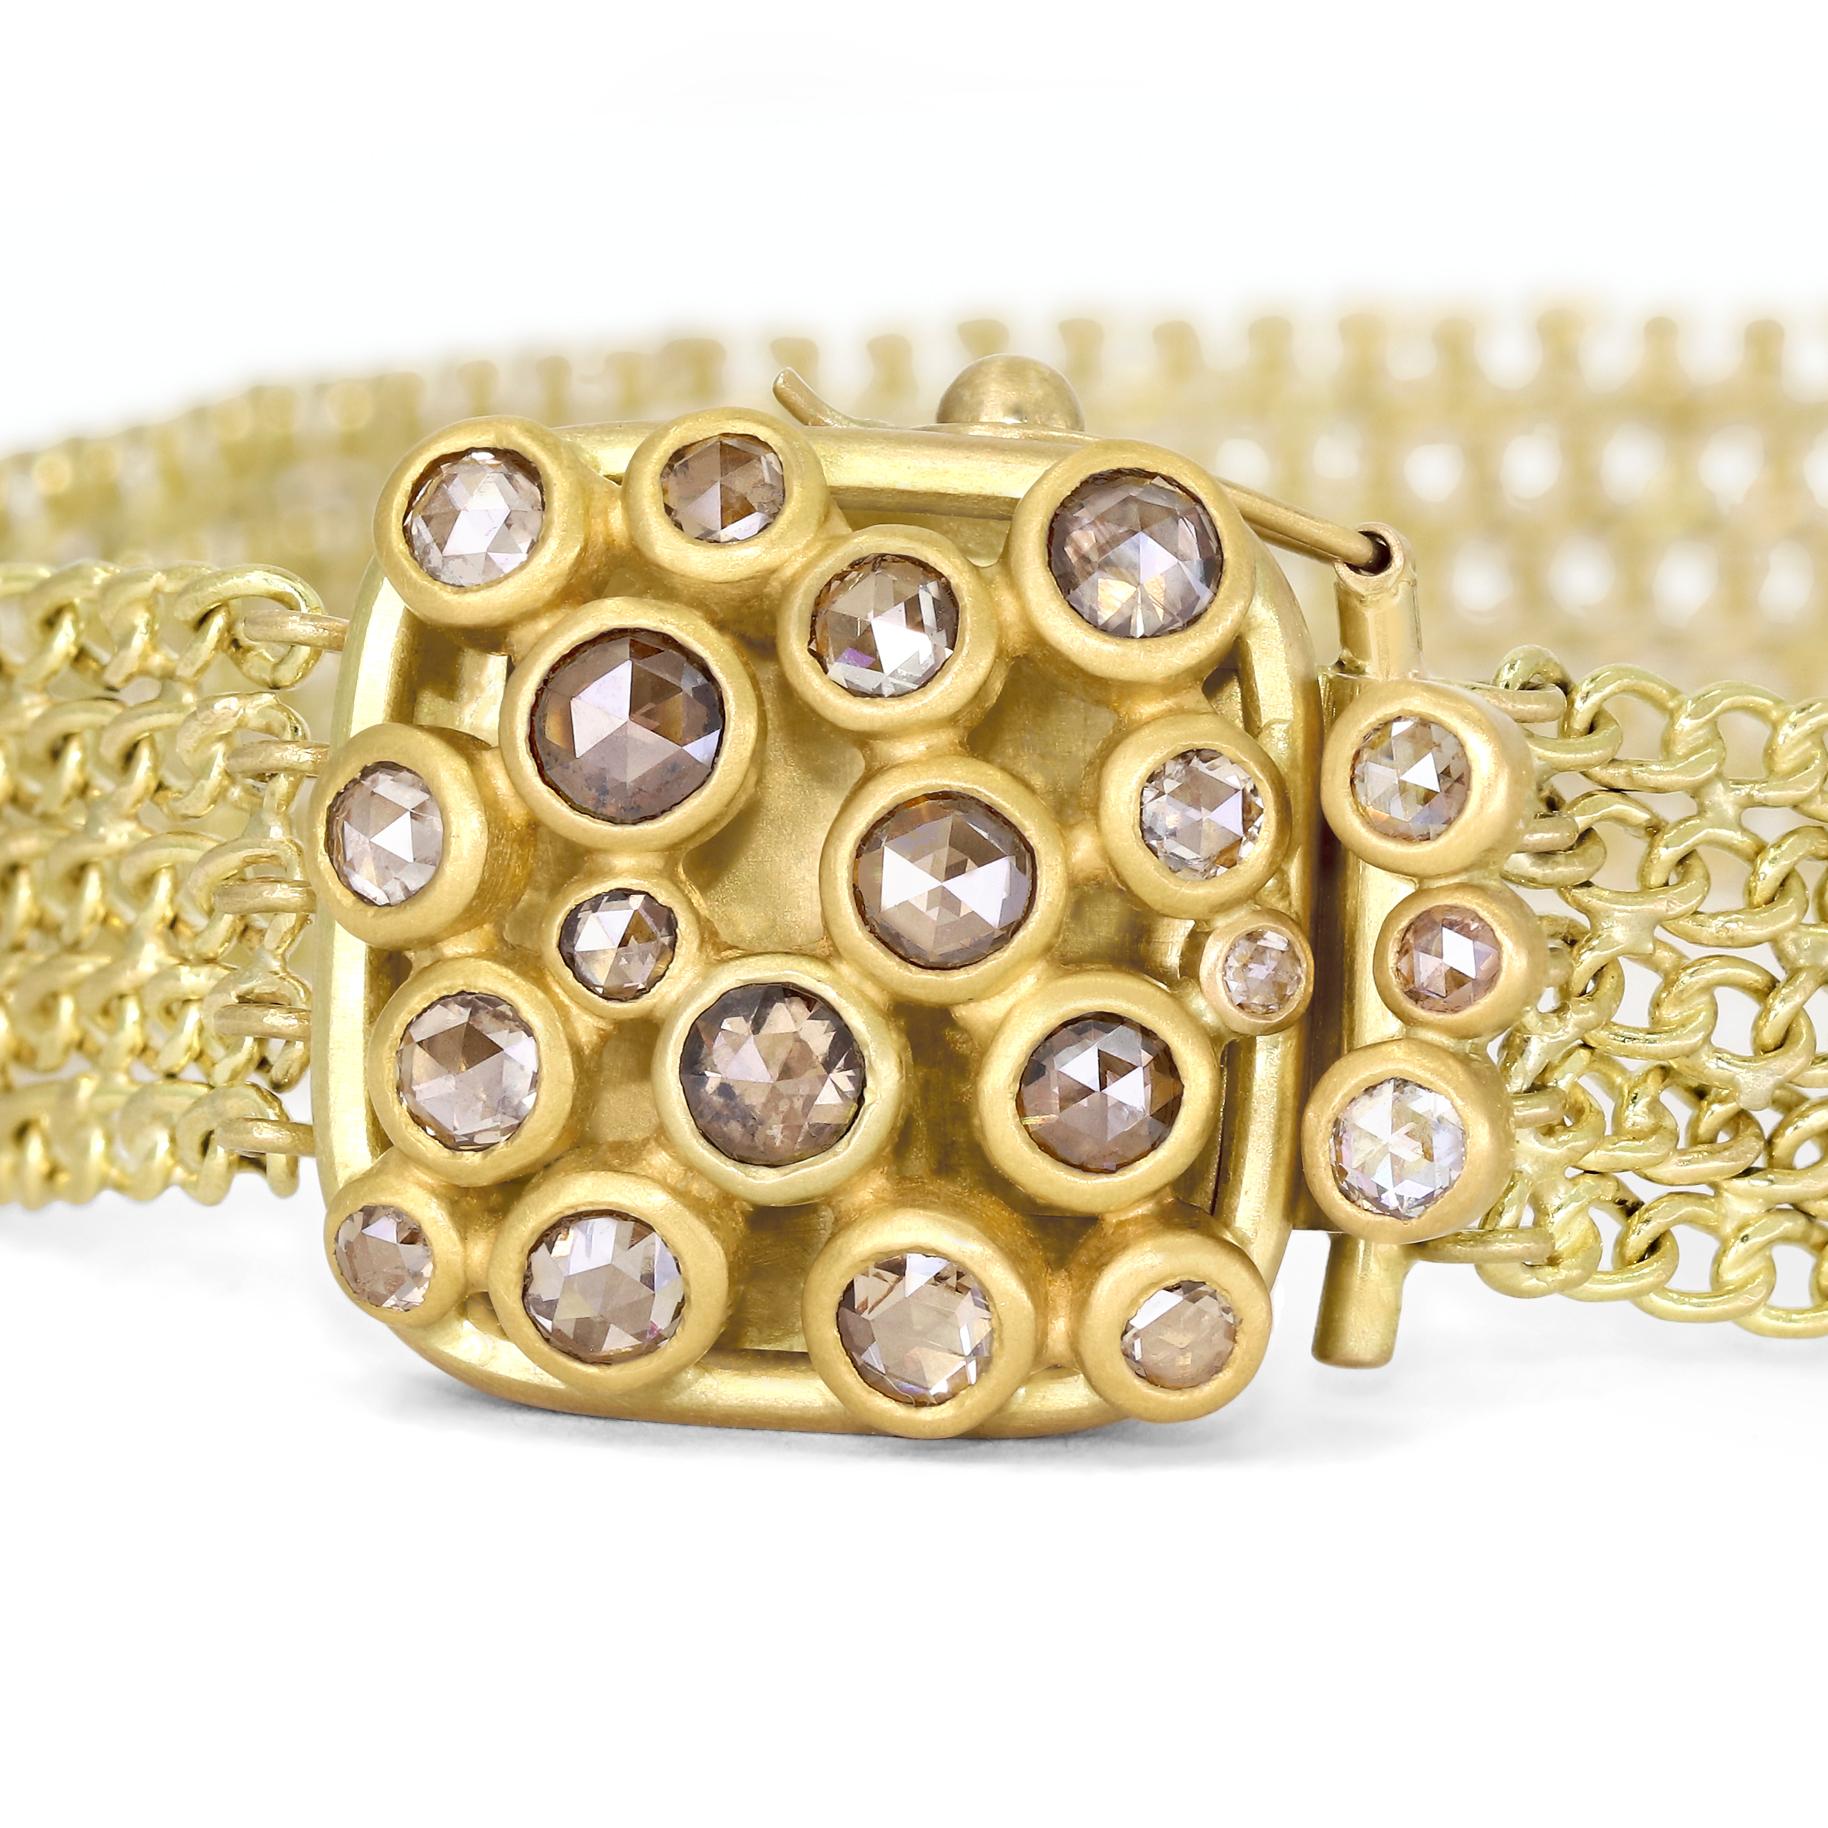 One of a Kind Disco Clasp Bracelet by award-winning jewelry maker Lola Brooks on completely hand-fabricated 18k yellow gold chainmaille showcasing 1.41 total carats of shimmering rose-cut diamonds, individually bezel-set atop an intricate handmade